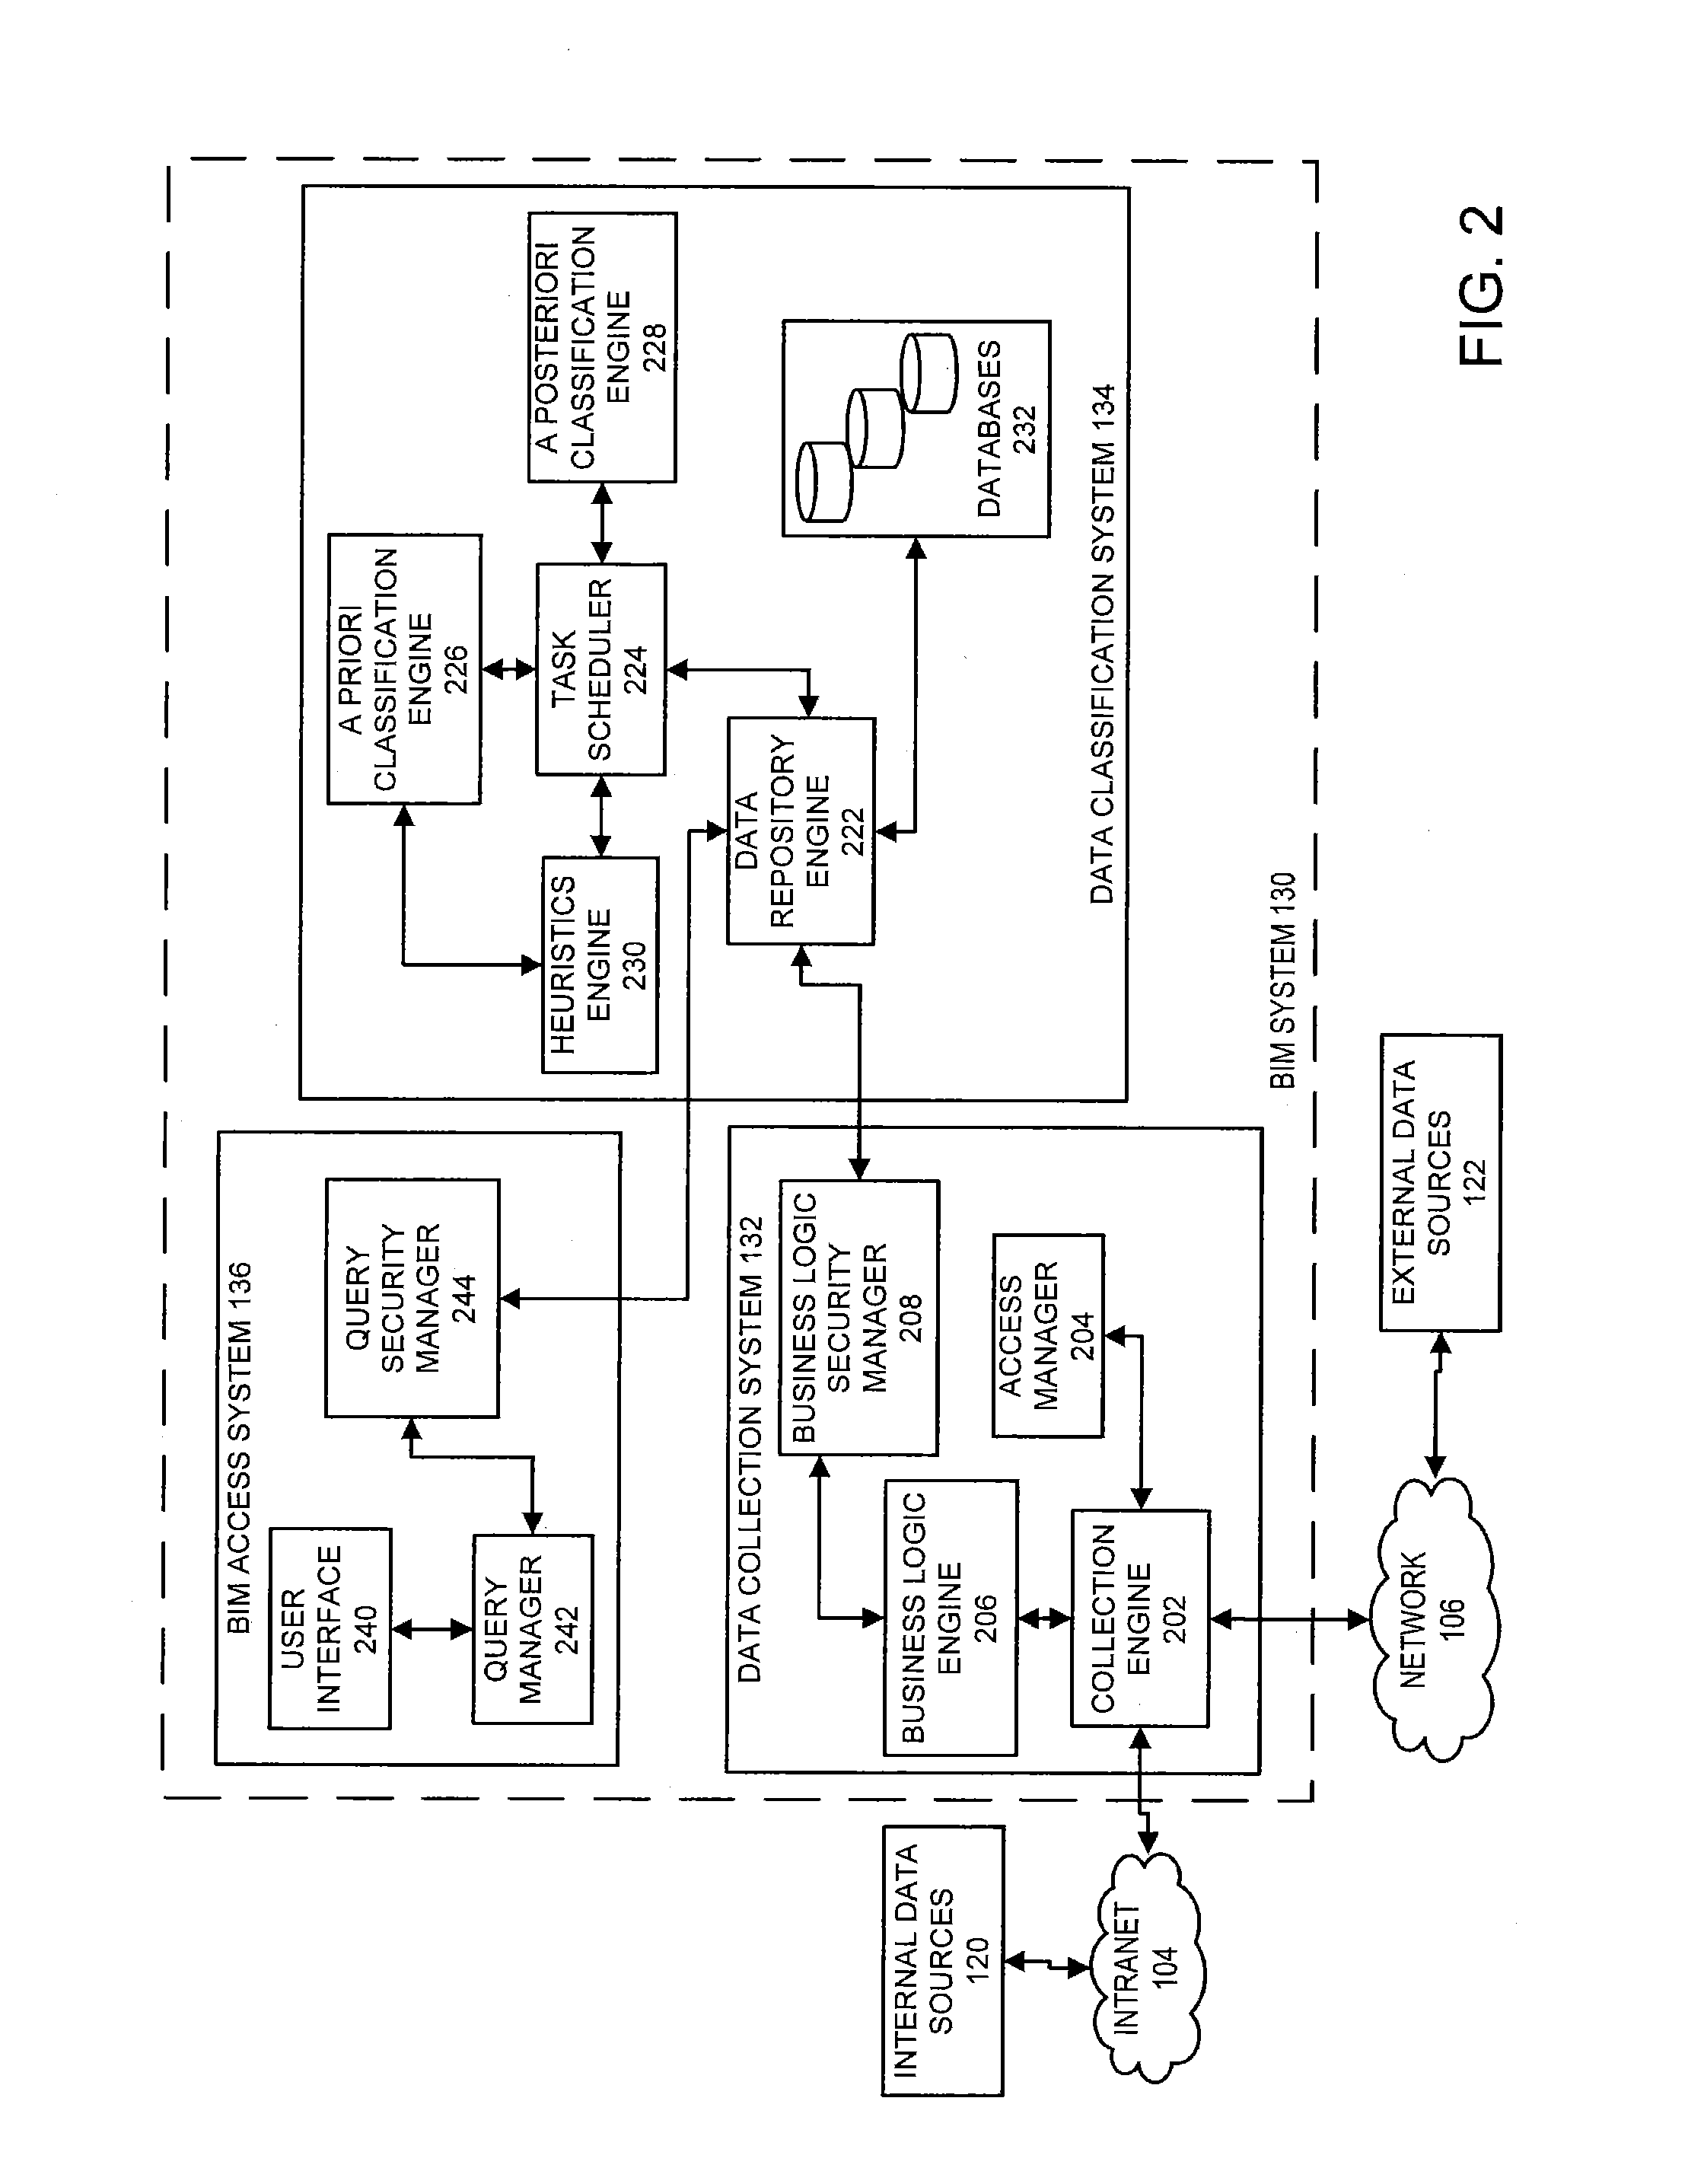 System and method for managing and identifying subject matter experts